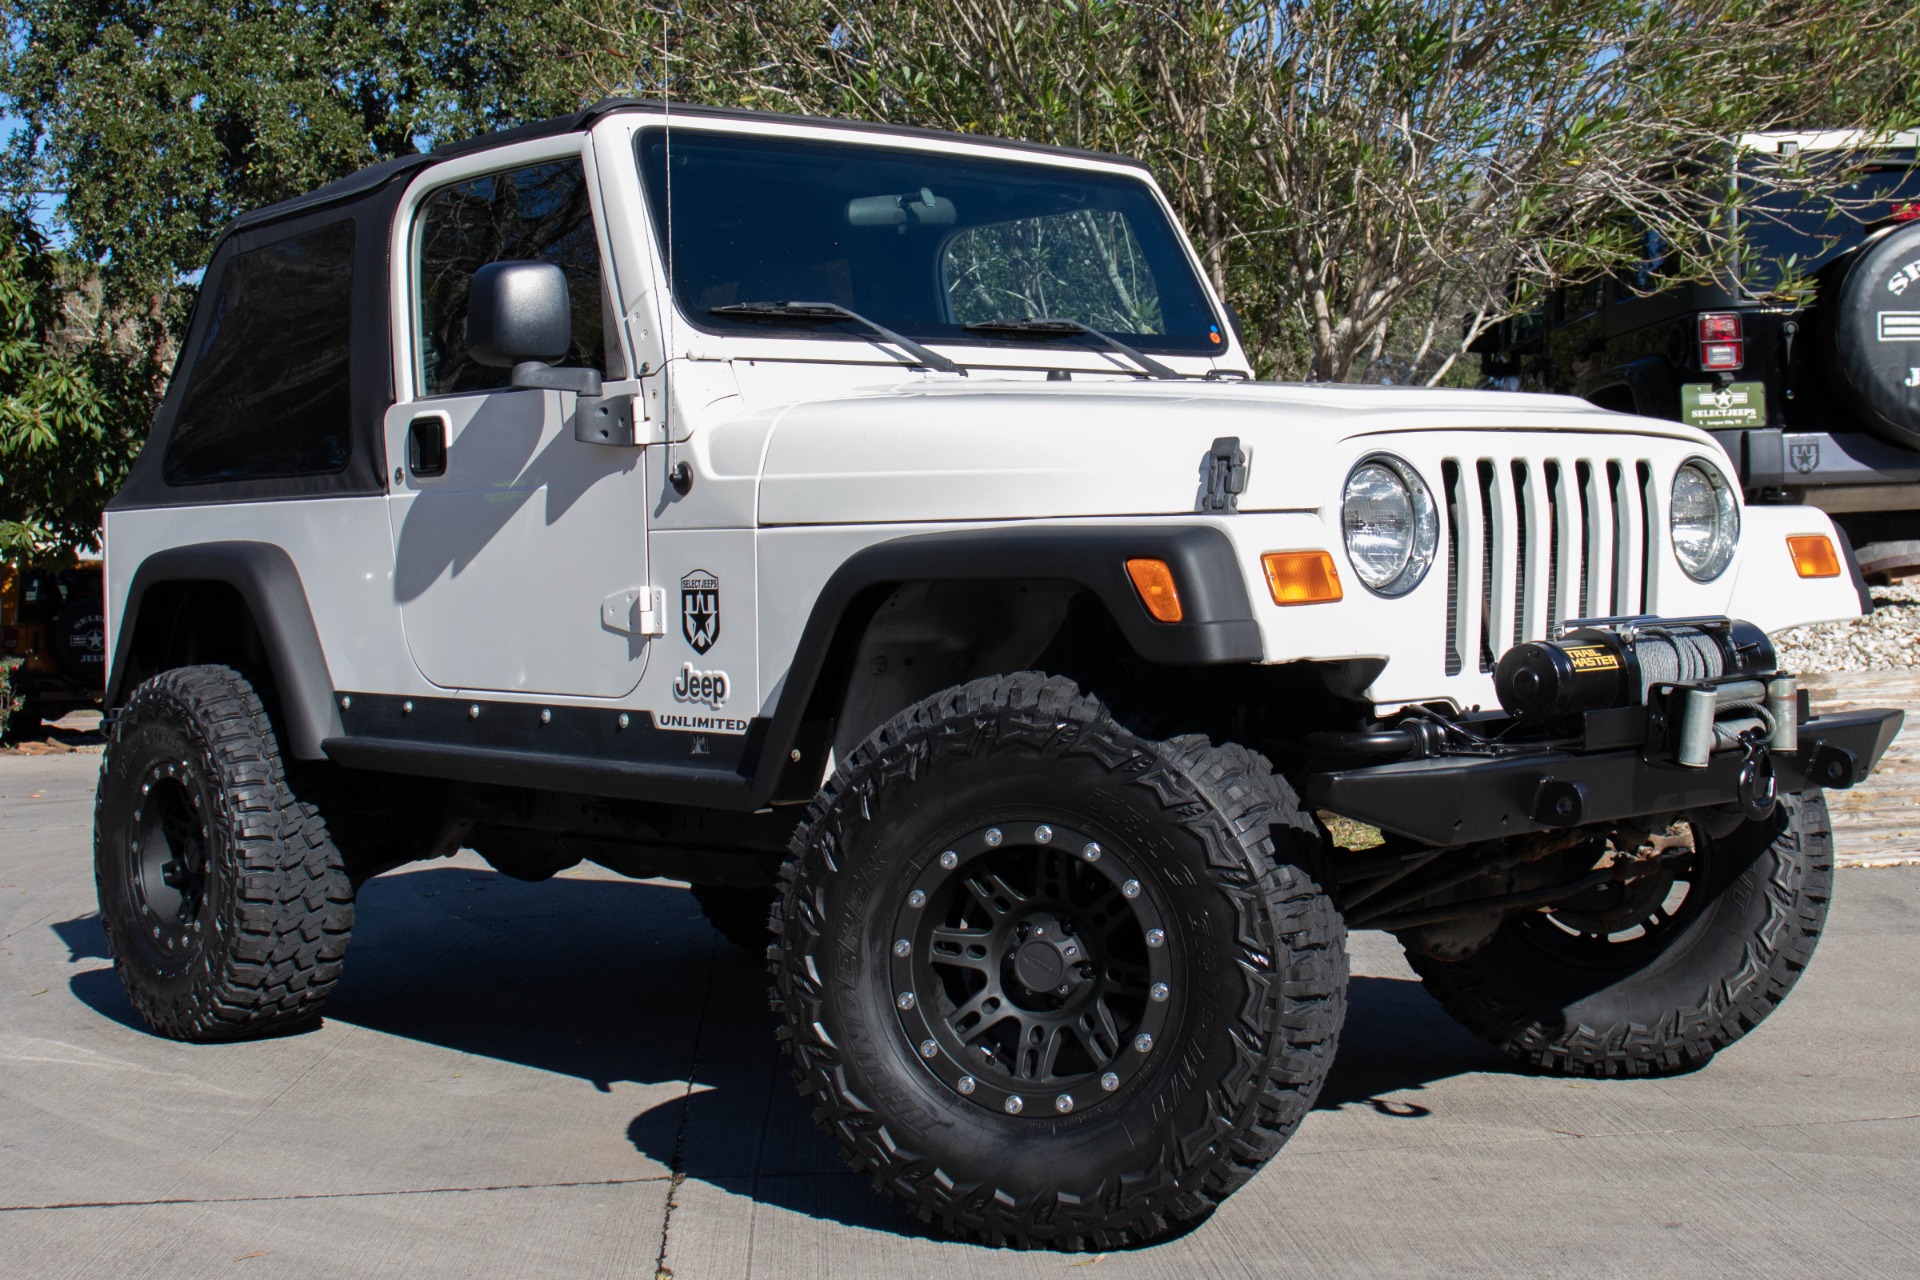 Used 2005 Jeep Wrangler Unlimited For Sale ($14,995) | Select Jeeps Inc.  Stock #332274